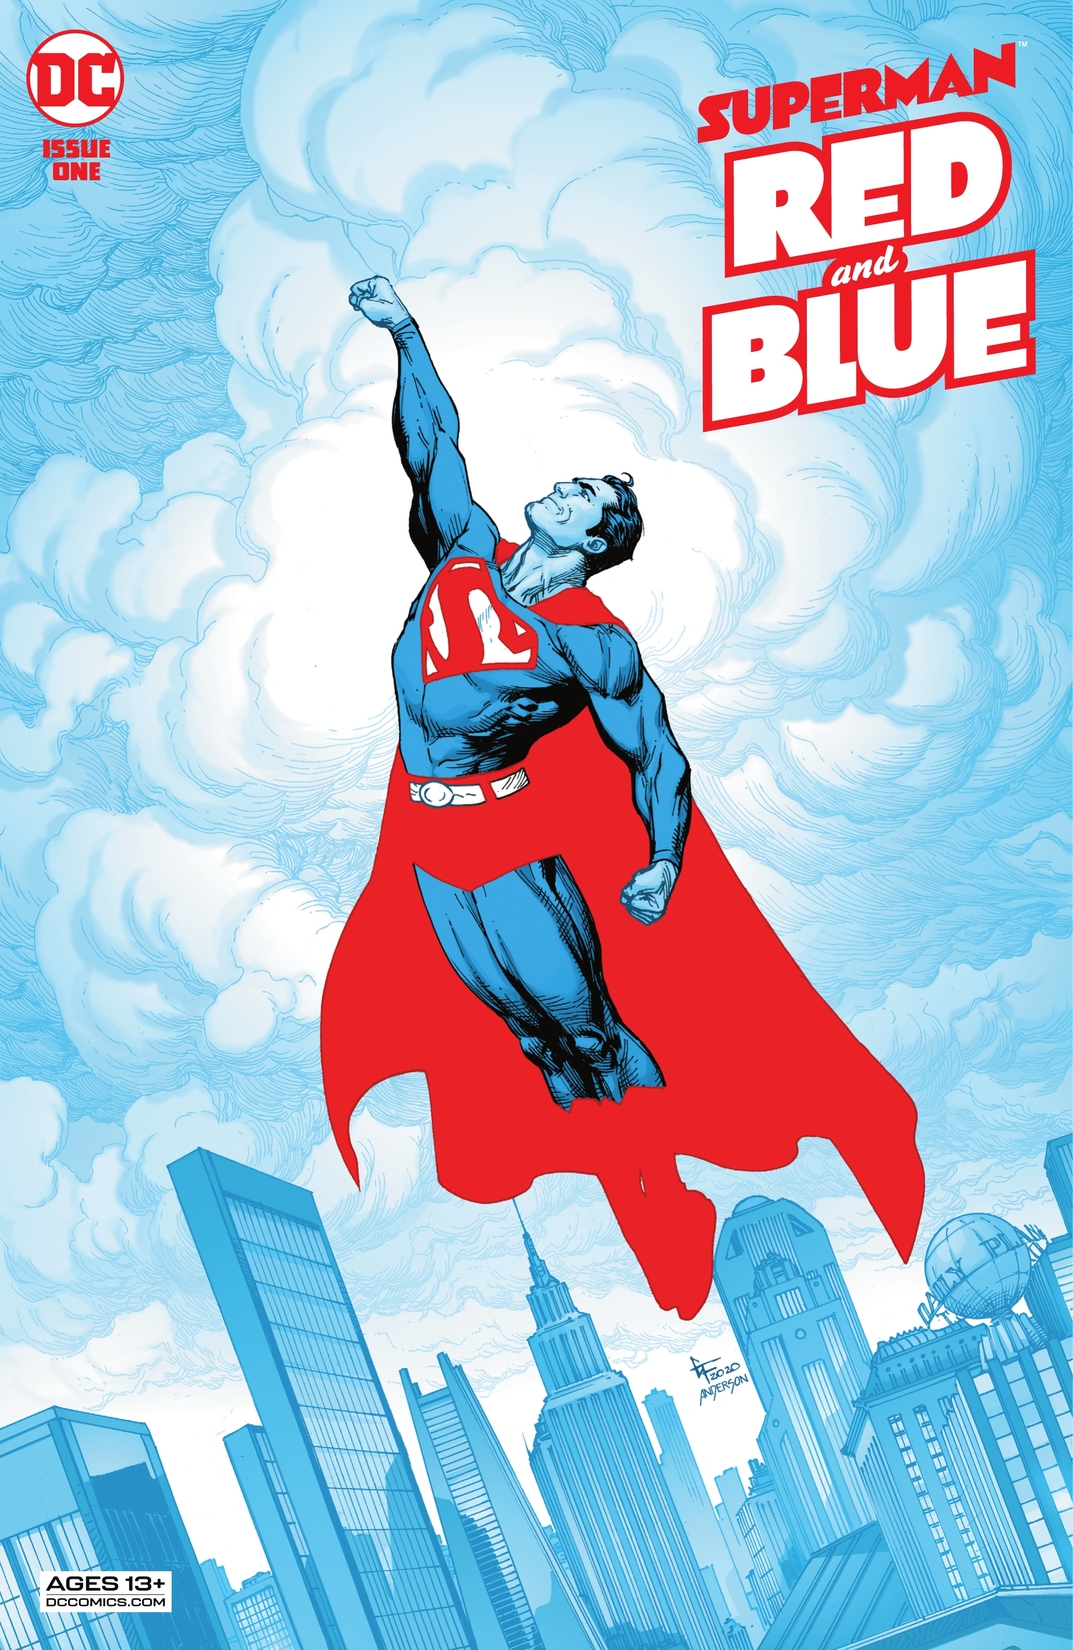 Superman Red & Blue #1 preview images